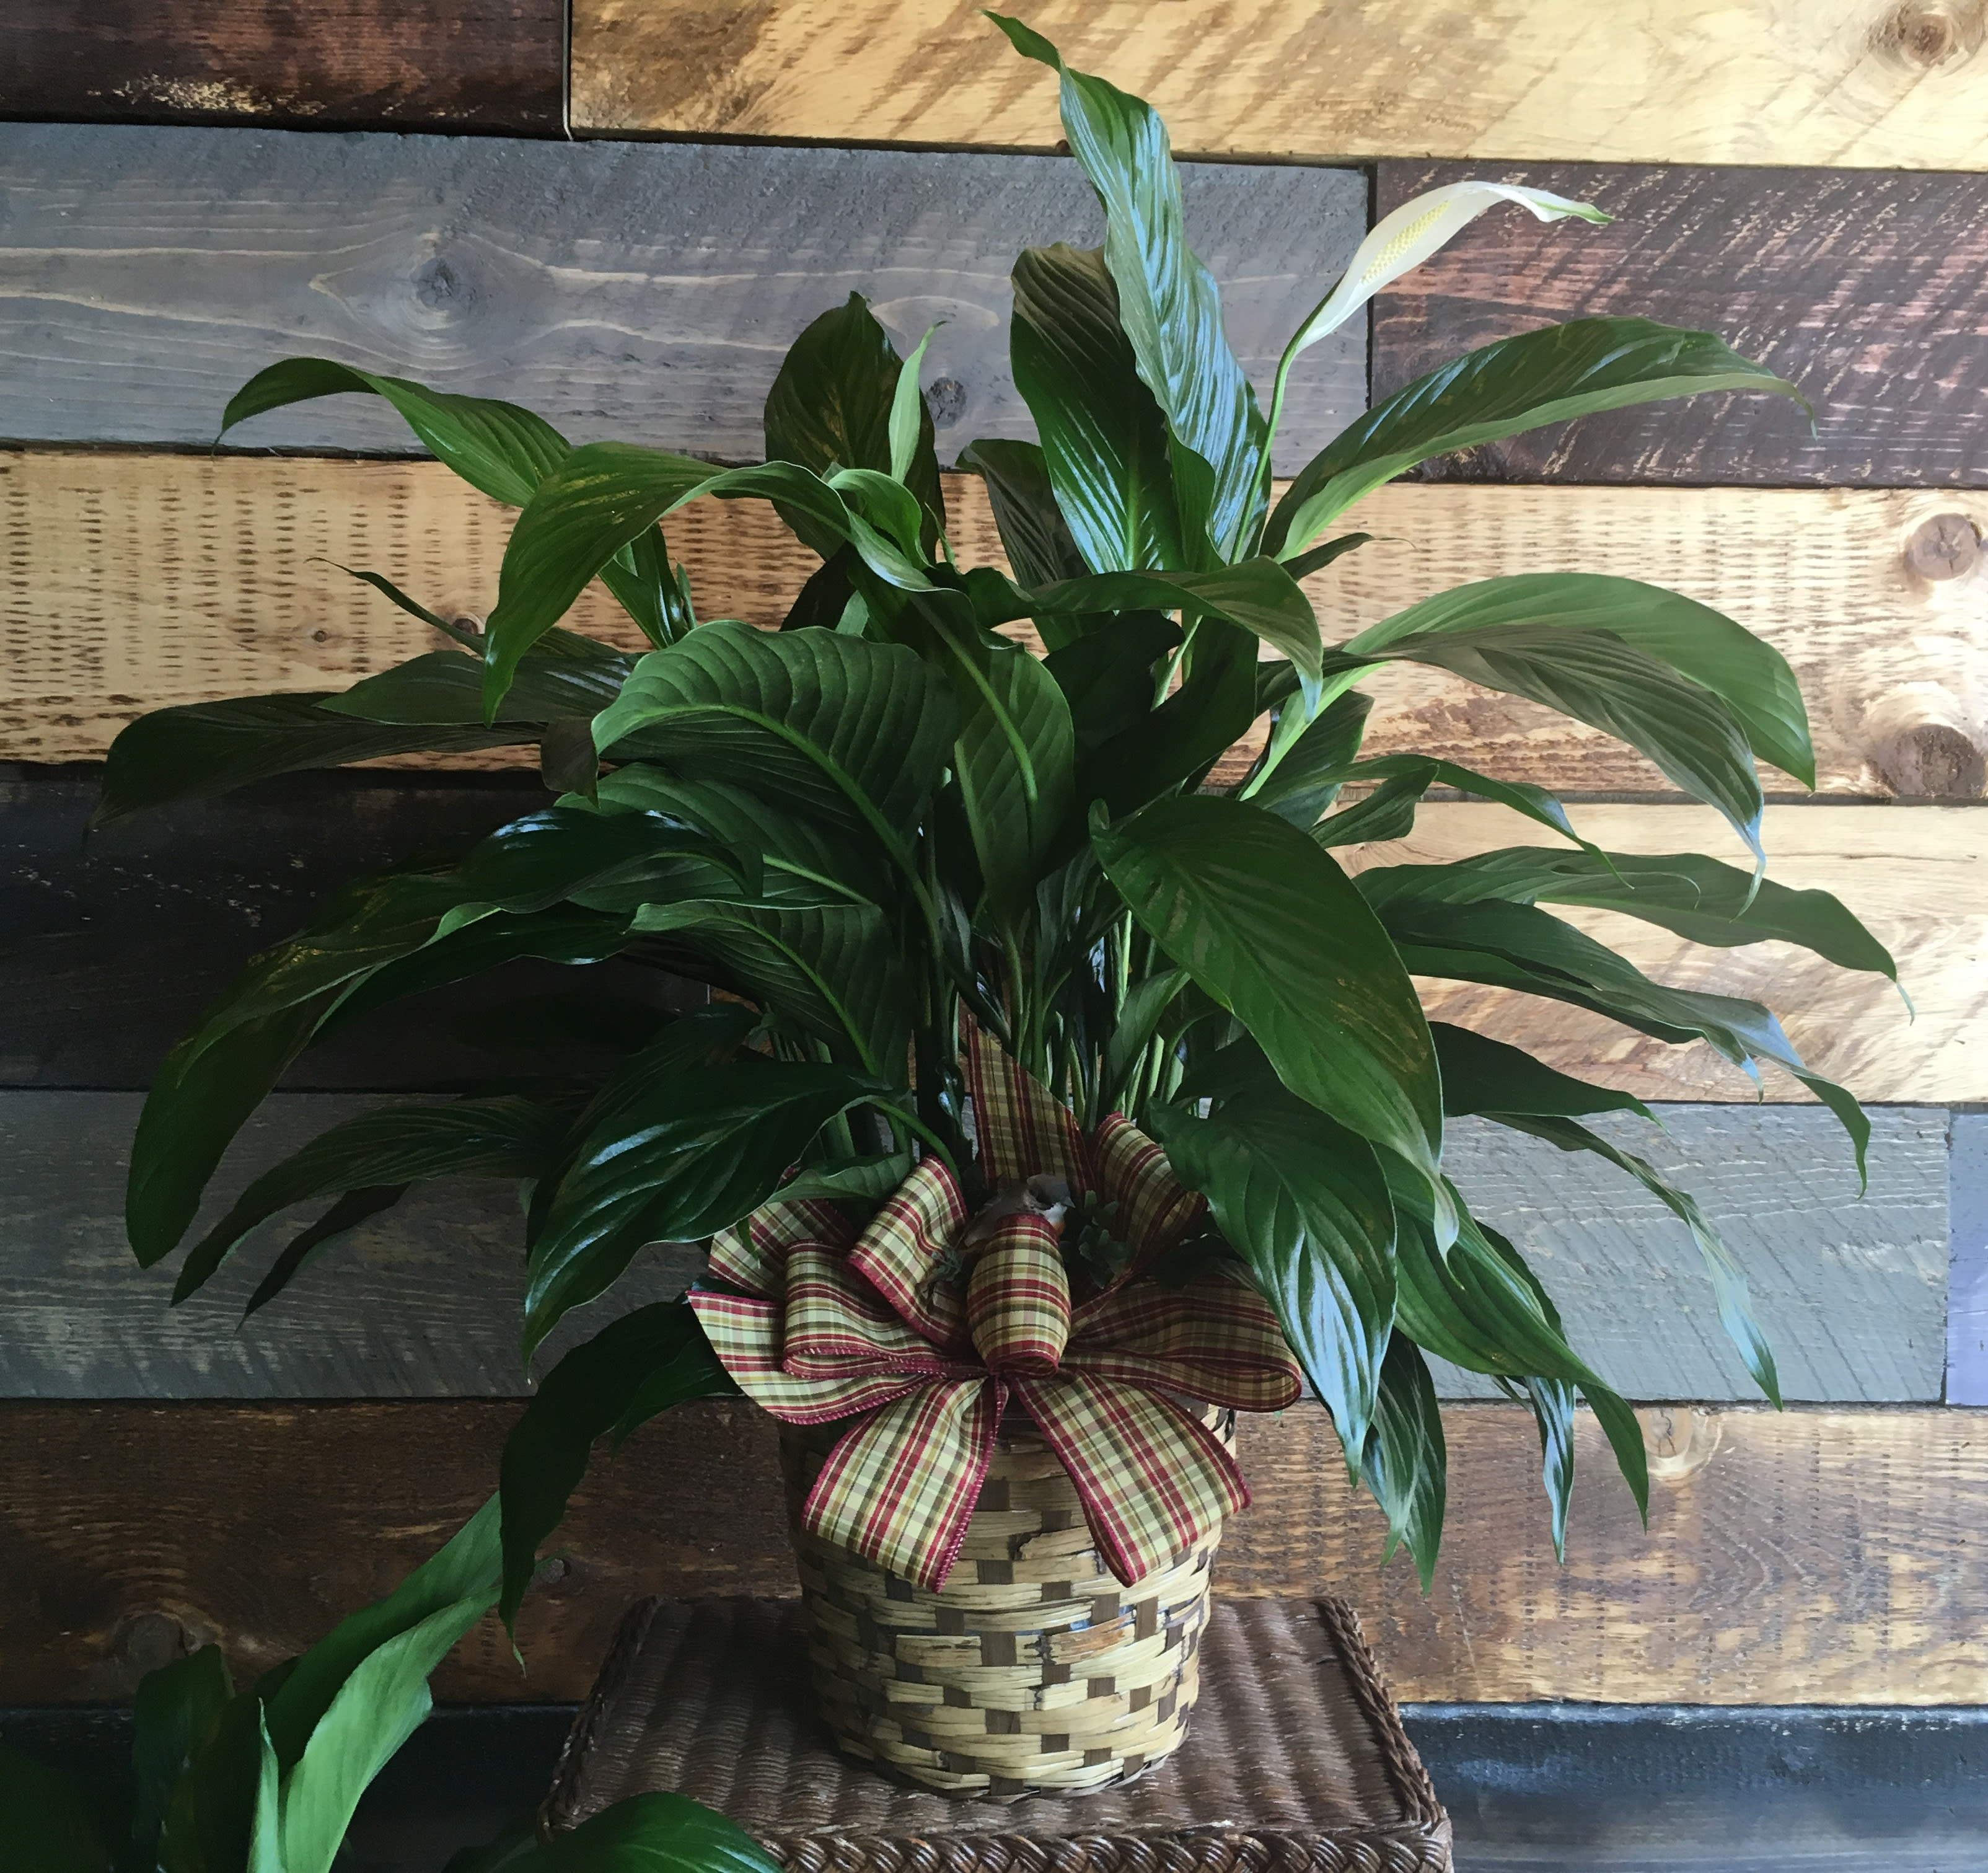 Peaceful Spathiphyllum, Large - A peaceful foliage plant with beautiful white blooms, dressed with a seasonal ribbon and nesting bird in a woven basket.  Ribbon and basket may vary with season and/or availability